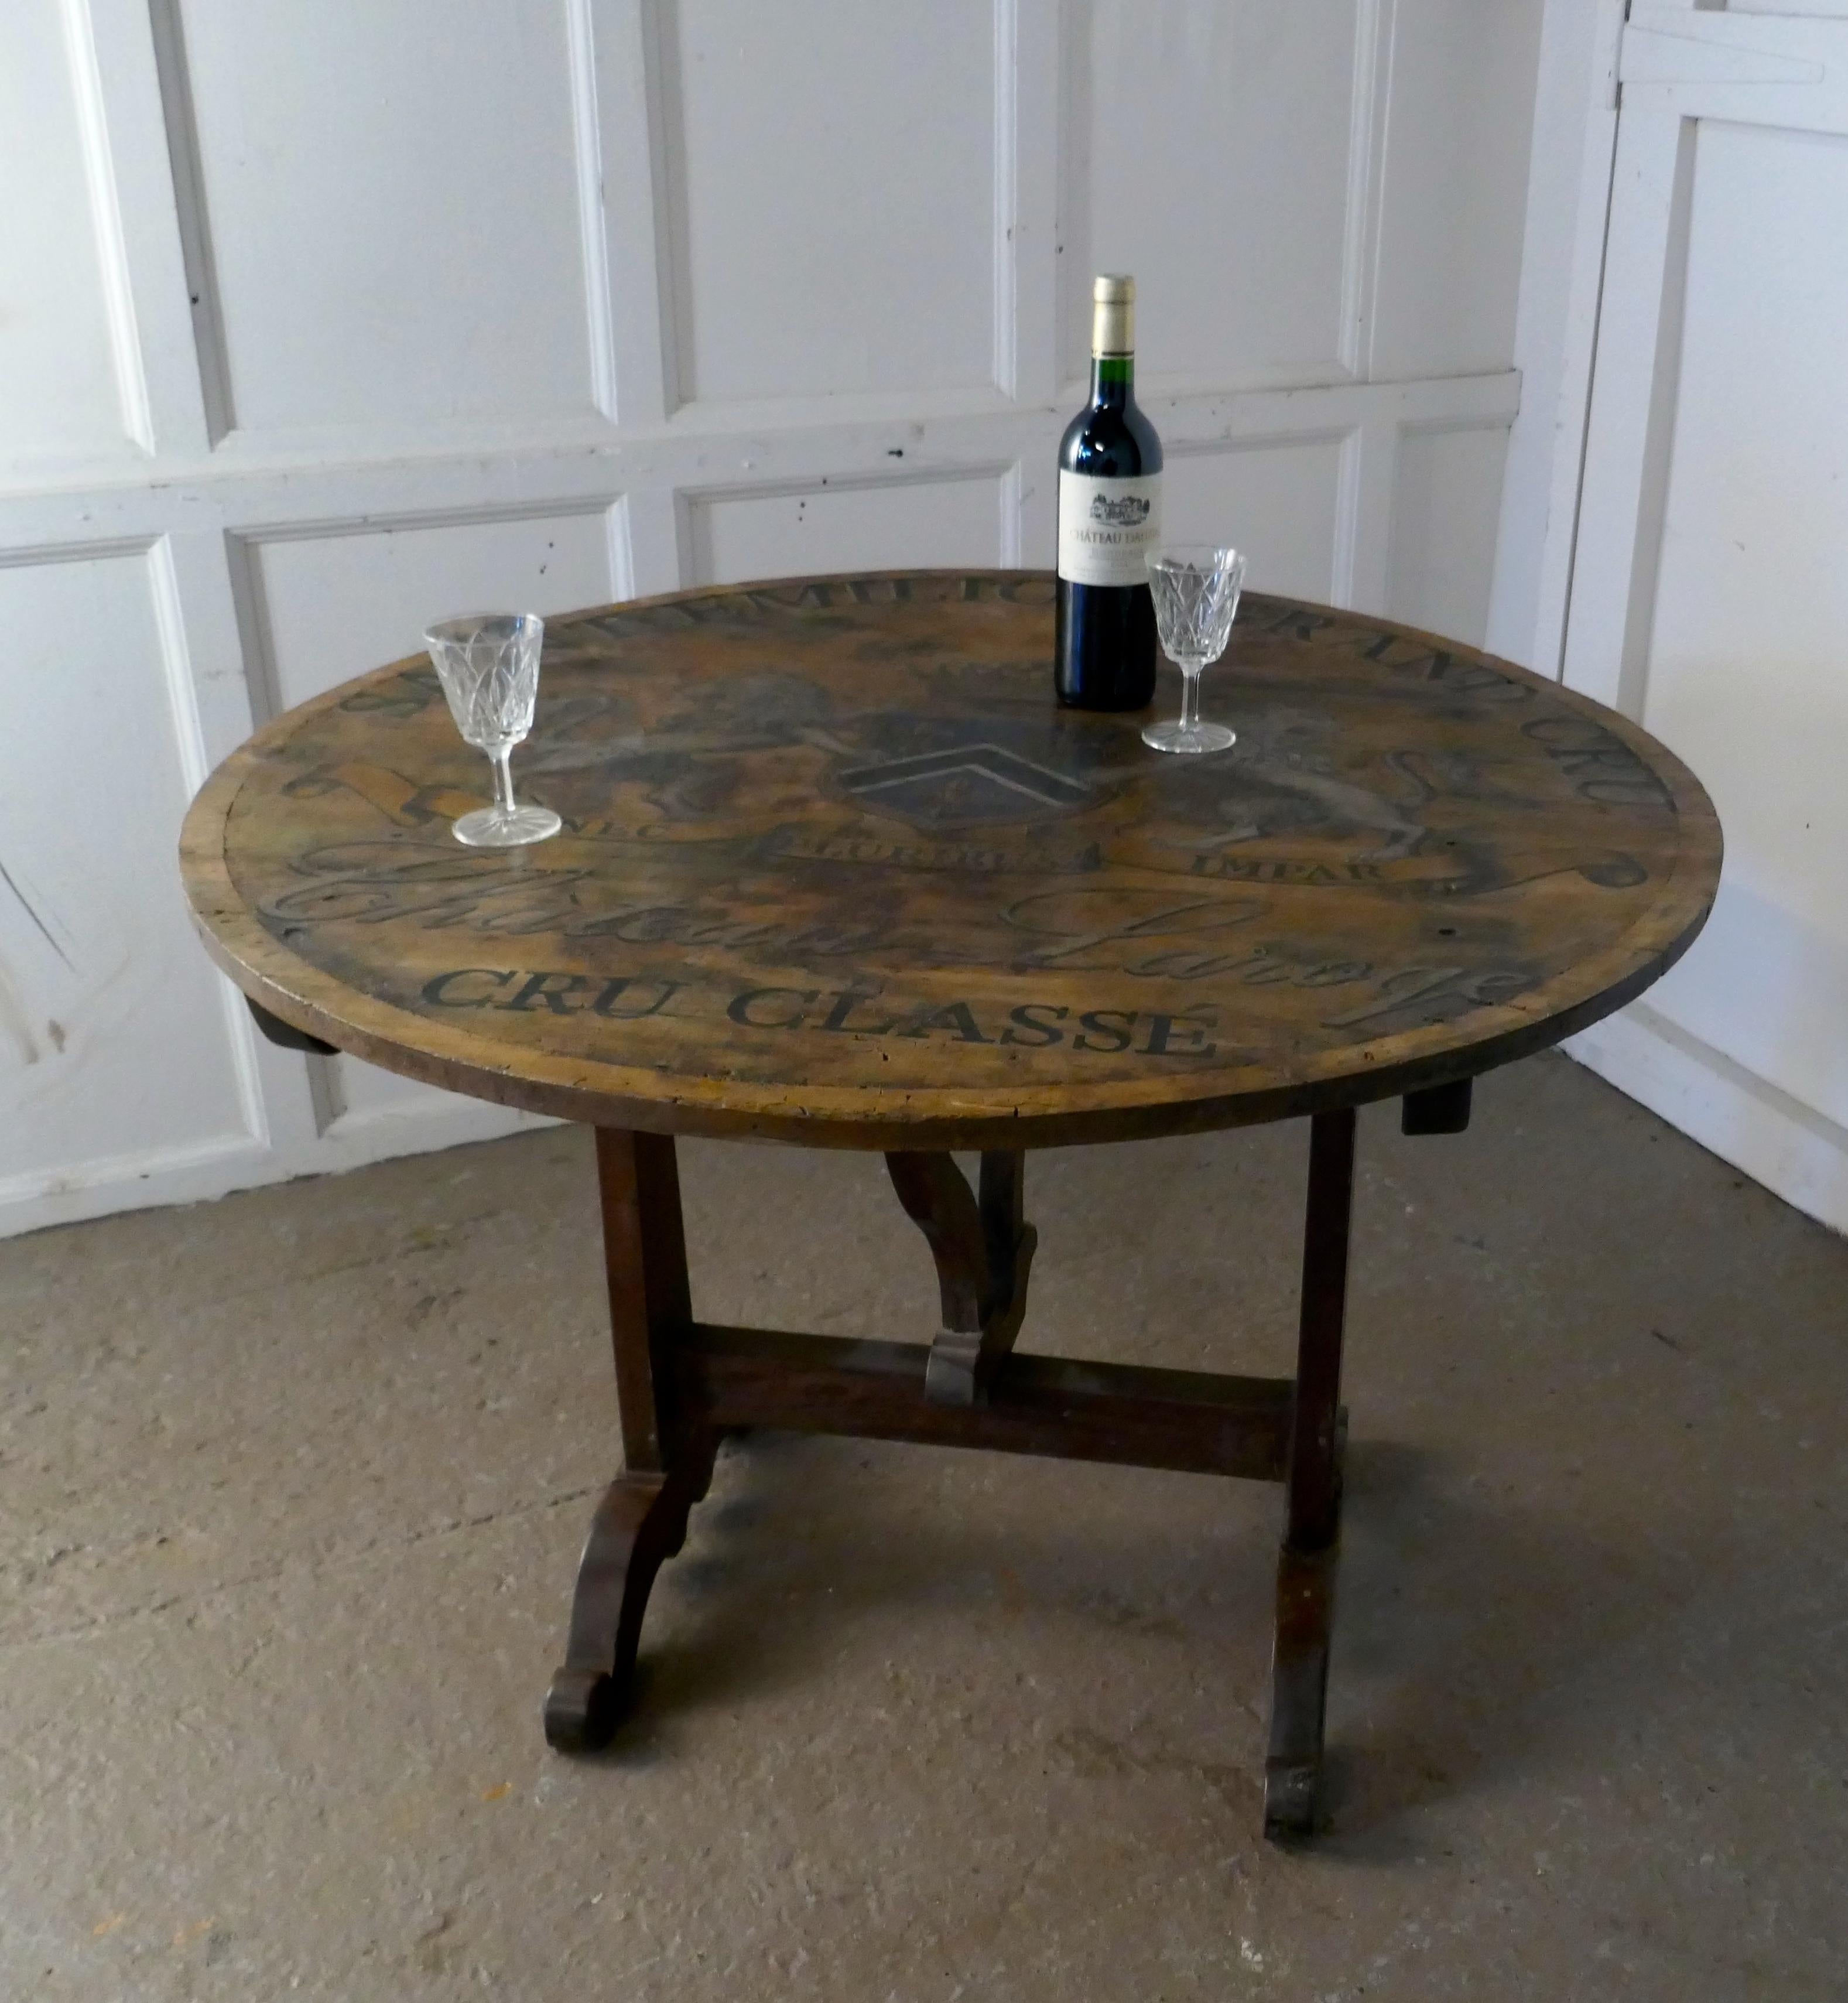 French Provincial 19th Century French Vineyard Wine Table from Chateau Laroge, Saint Emilion